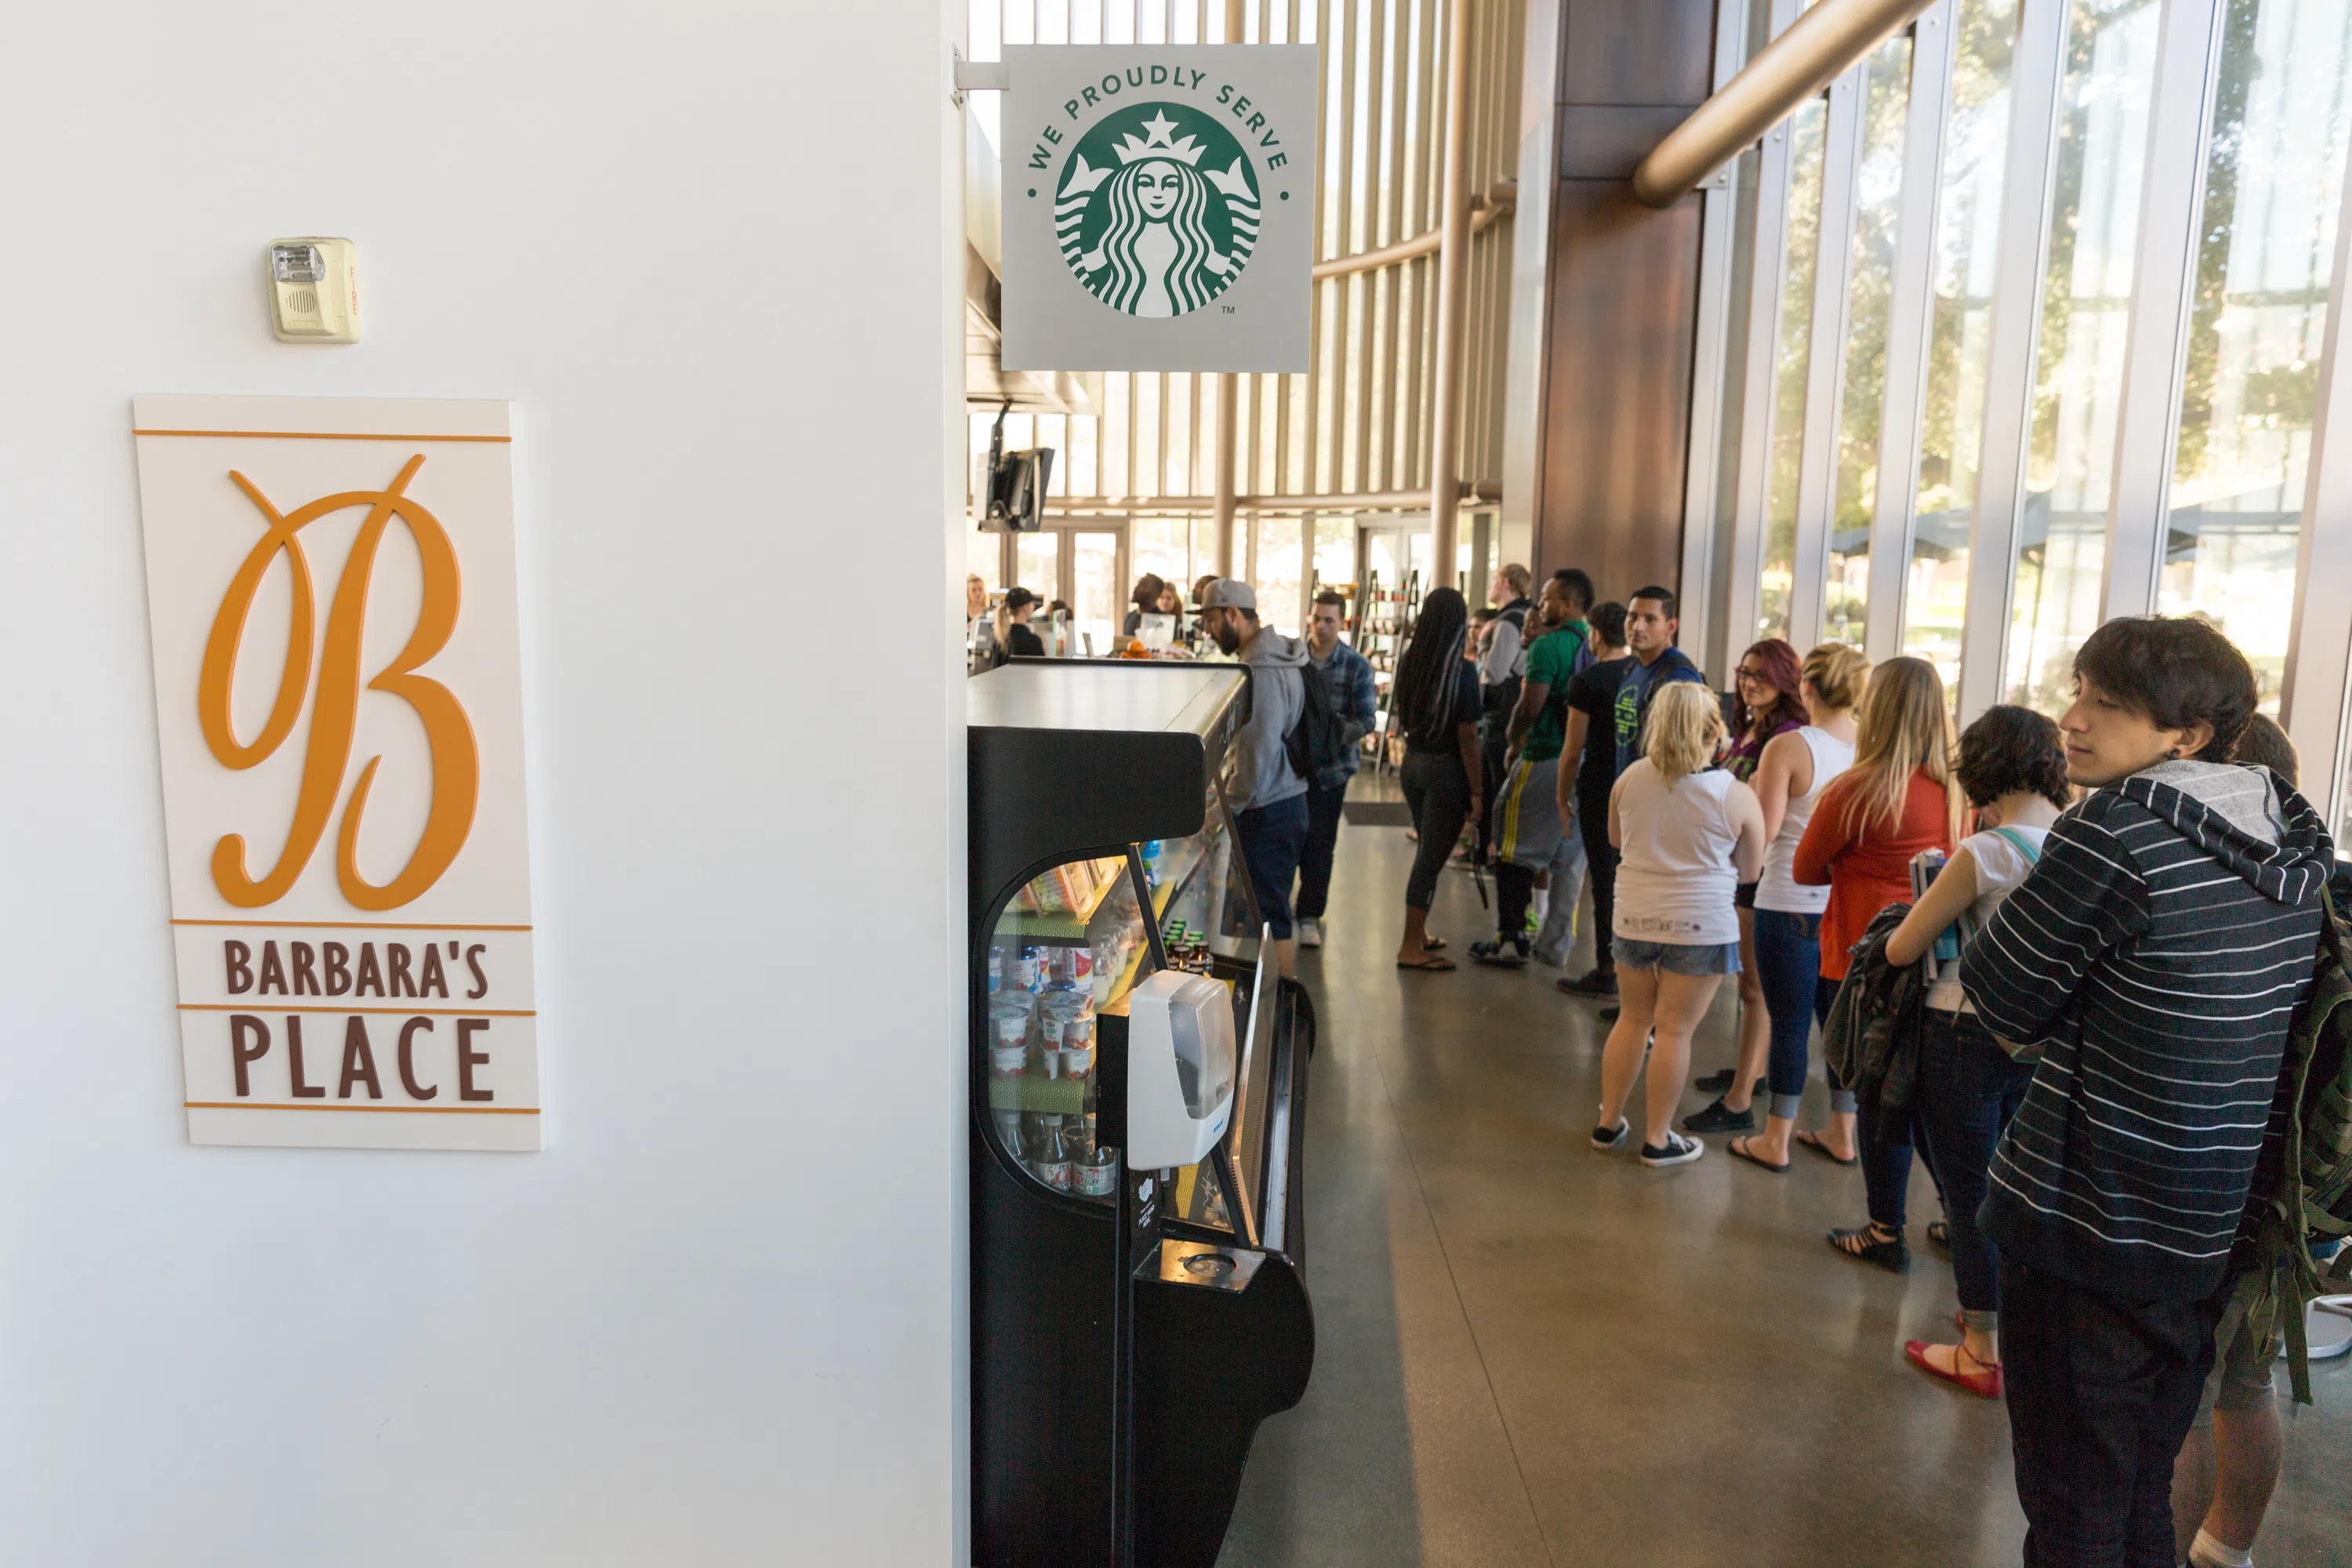 The Abraham Campus Center is home to the Office of Student Life, the Admission Office, and Barb's place, a quick dining spot with a Starbucks